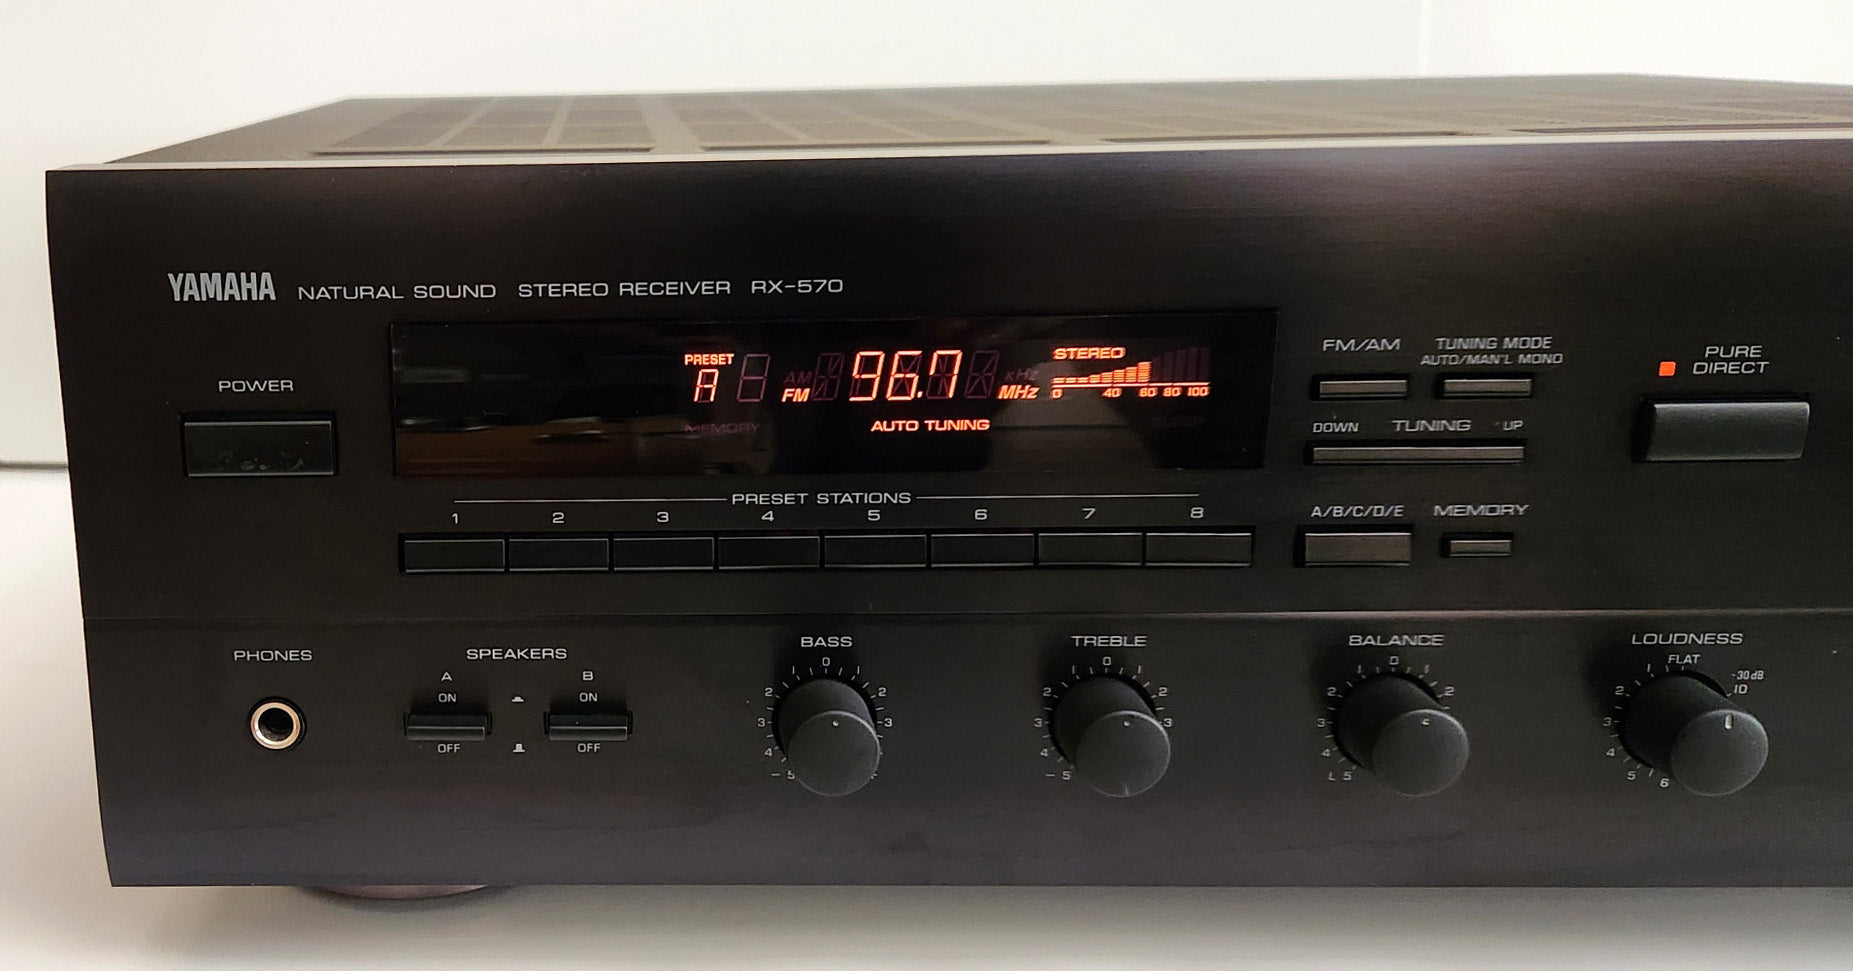 Yamaha RX-570 Natural Sound 2-CH Stereo FM/AM Receiver - Left